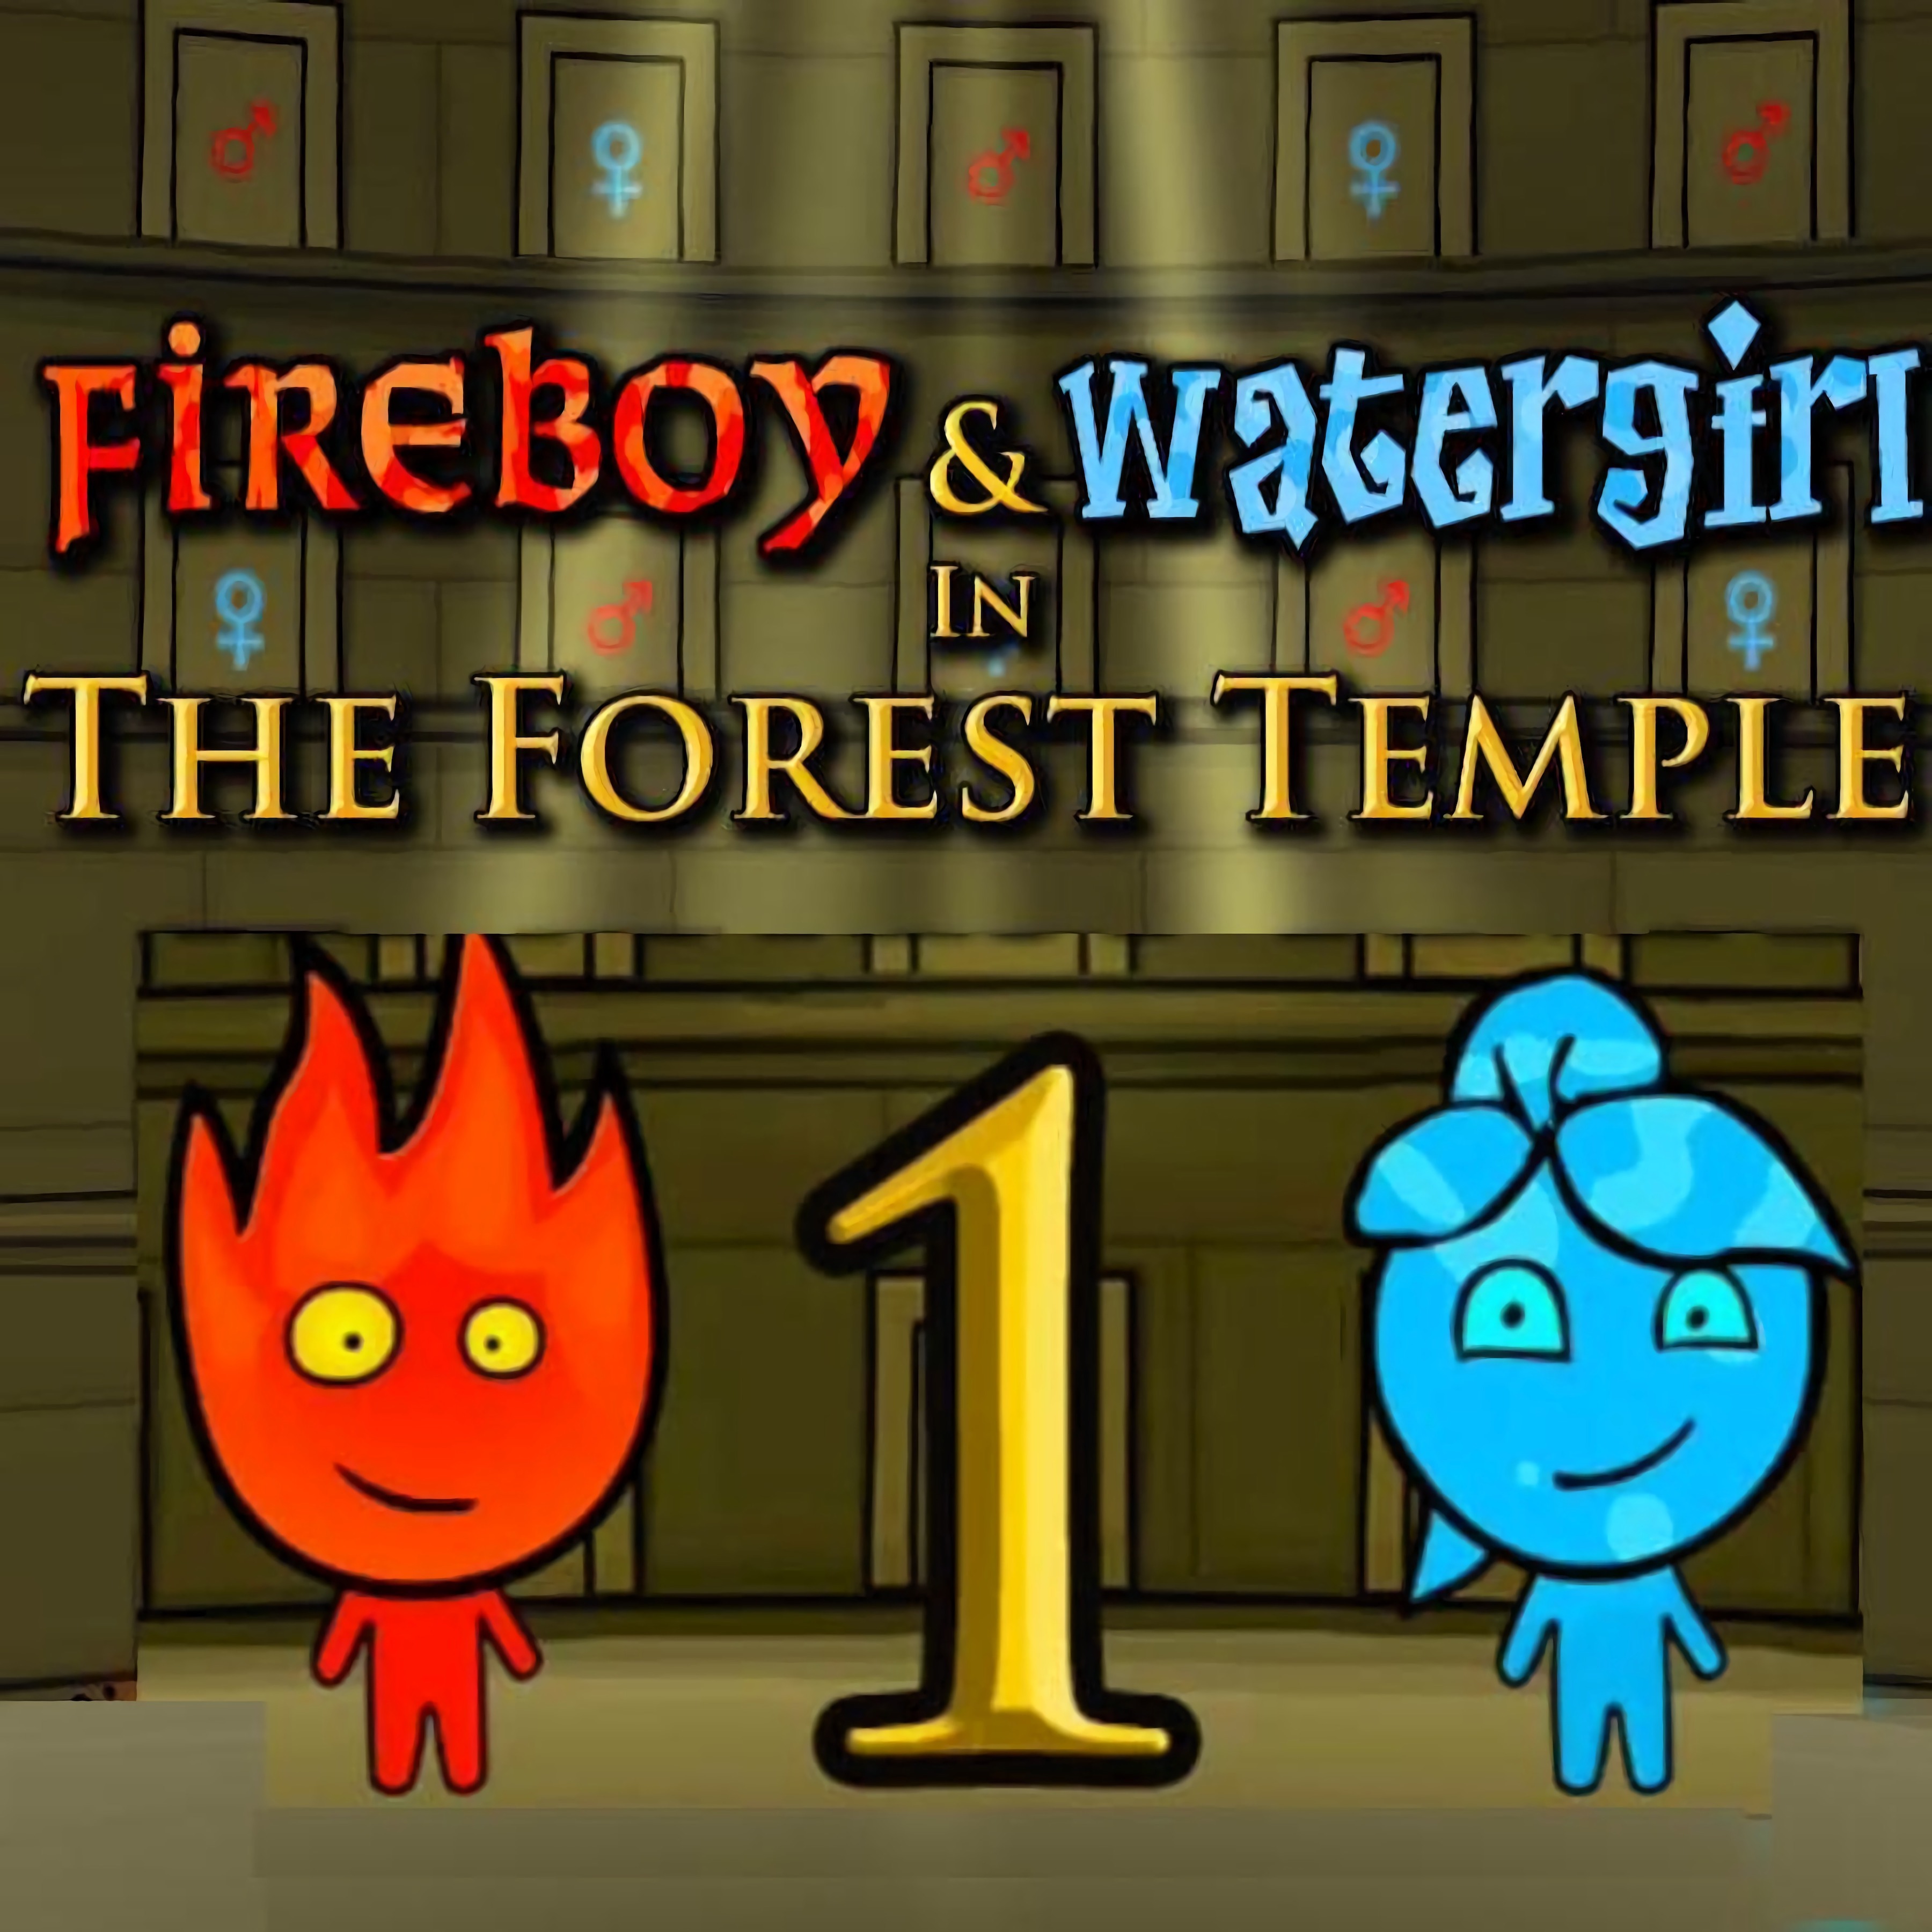 Fireboy and watergirl 3 the forest temple - jesluck